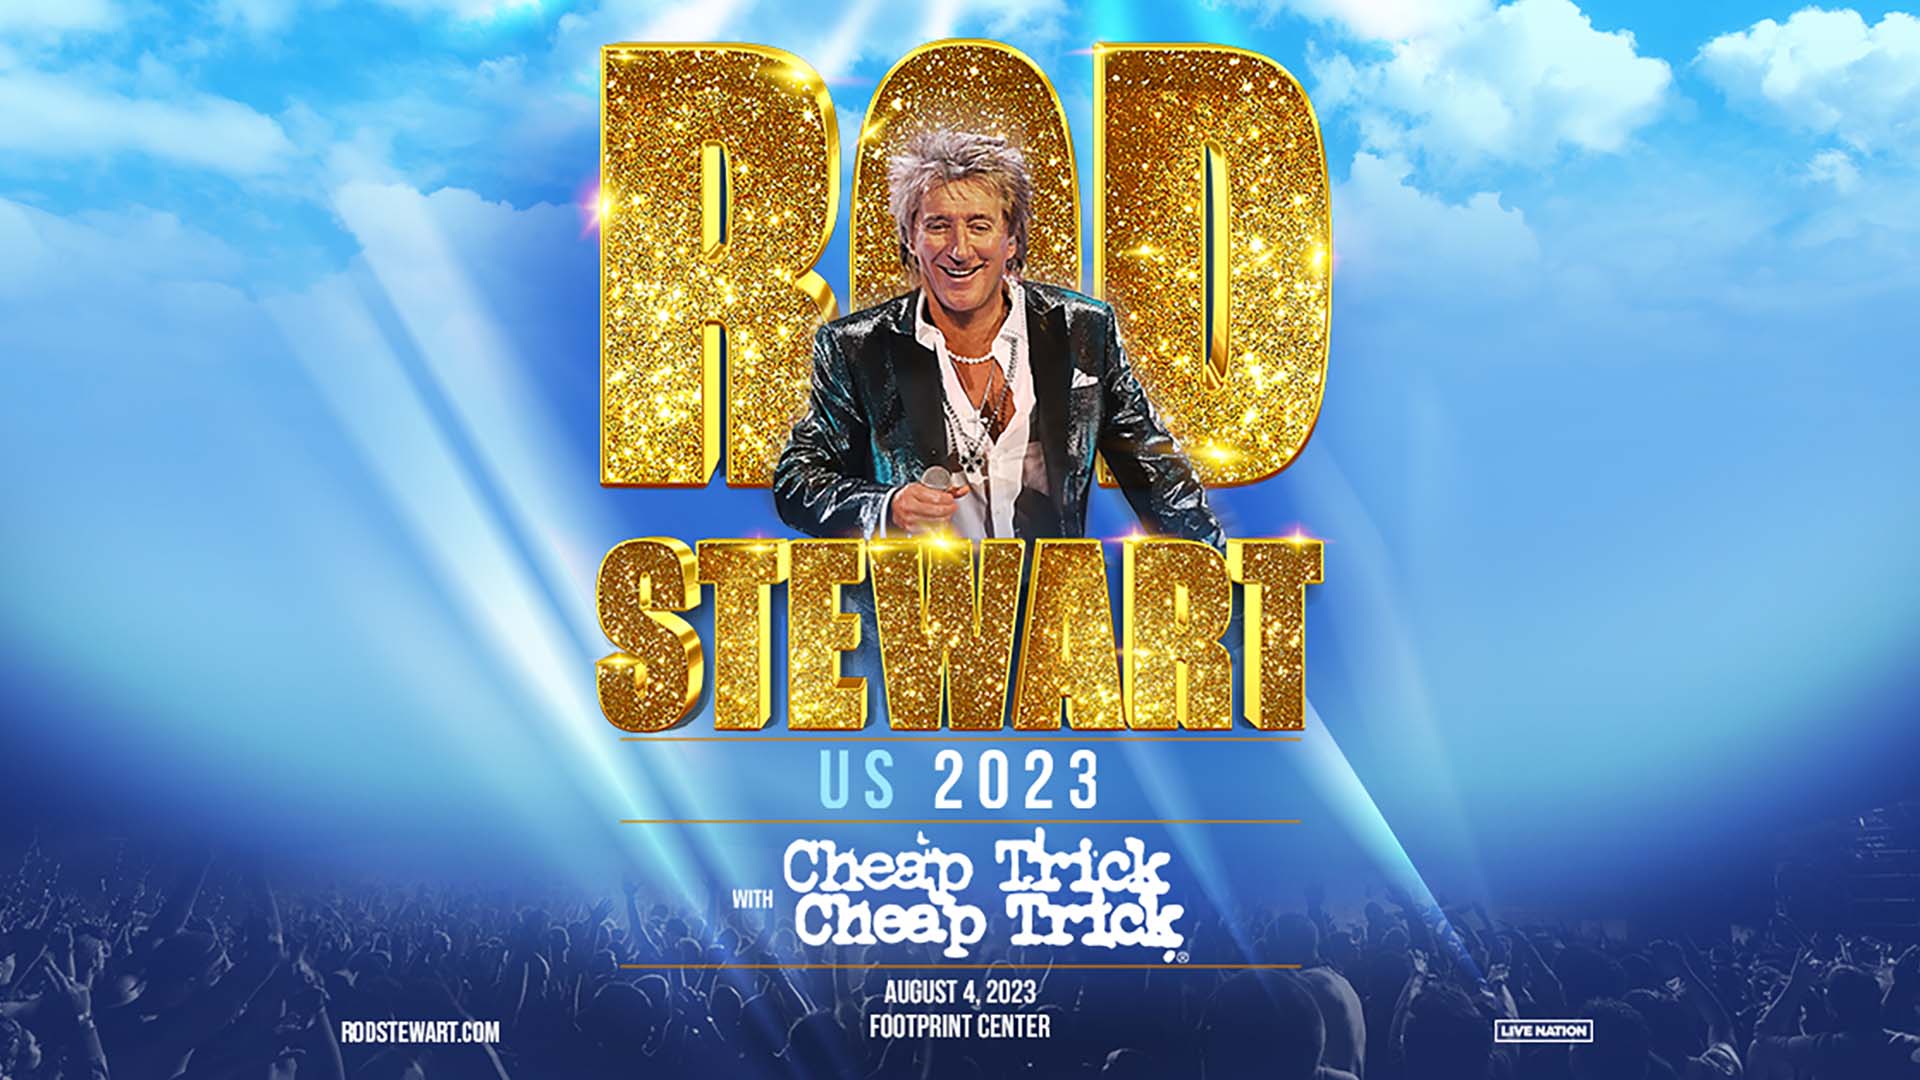 Rod Steward - US 2023 with Cheap Trick on August 4, 2023